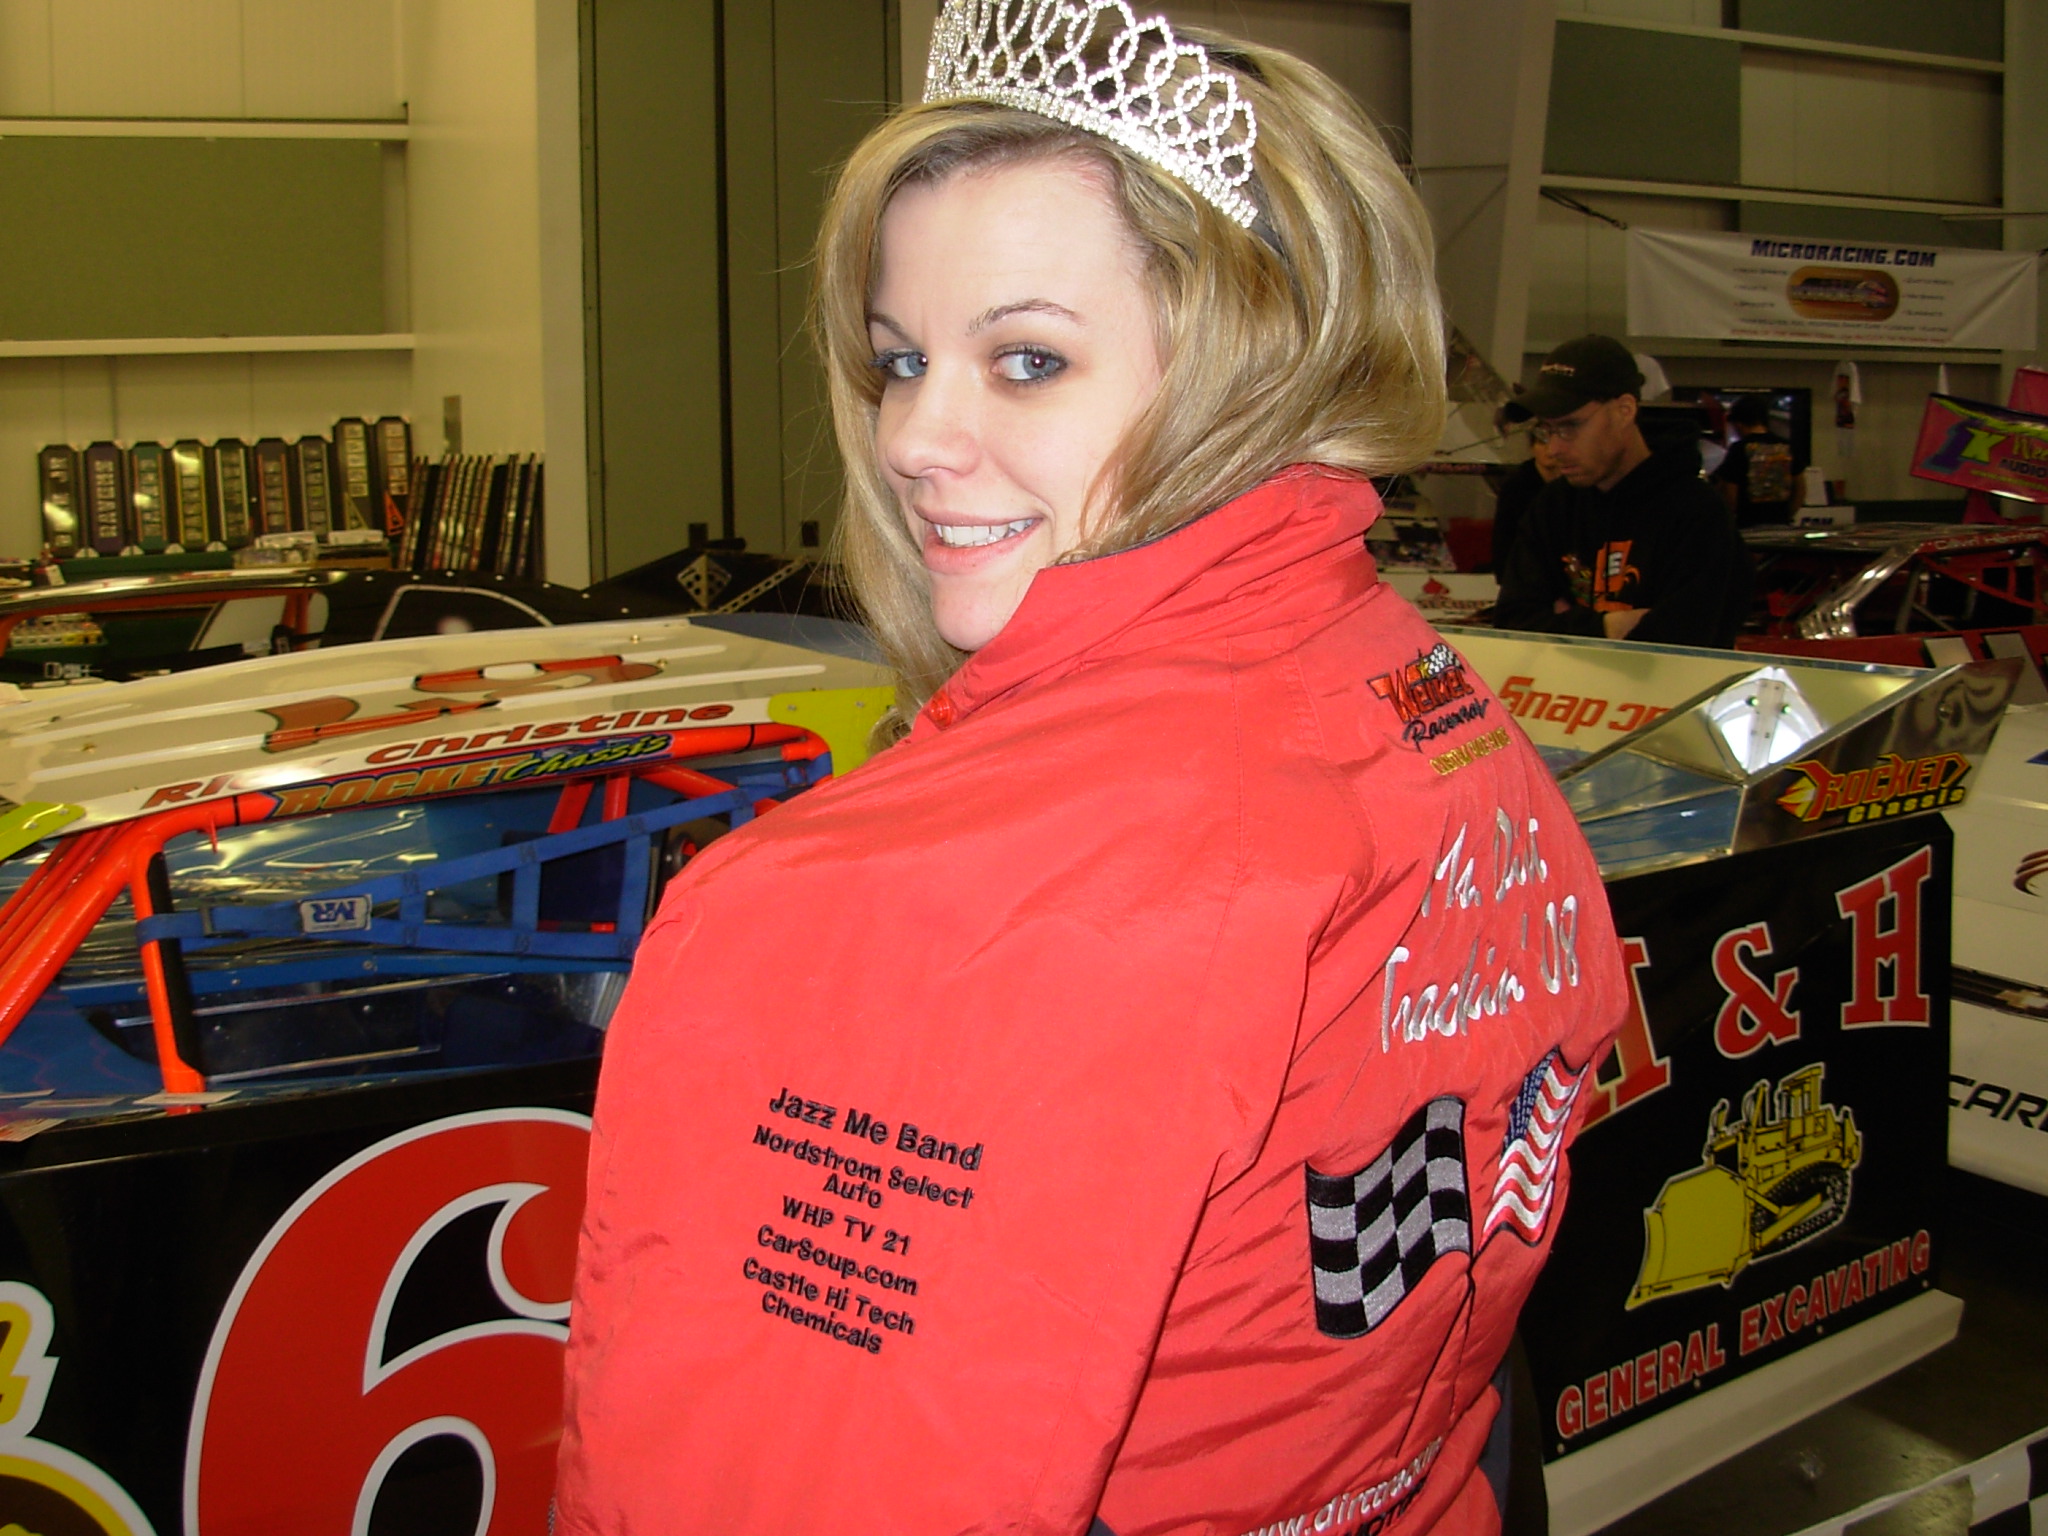 Ms. Dirt Trackin' showing off her Jacket
